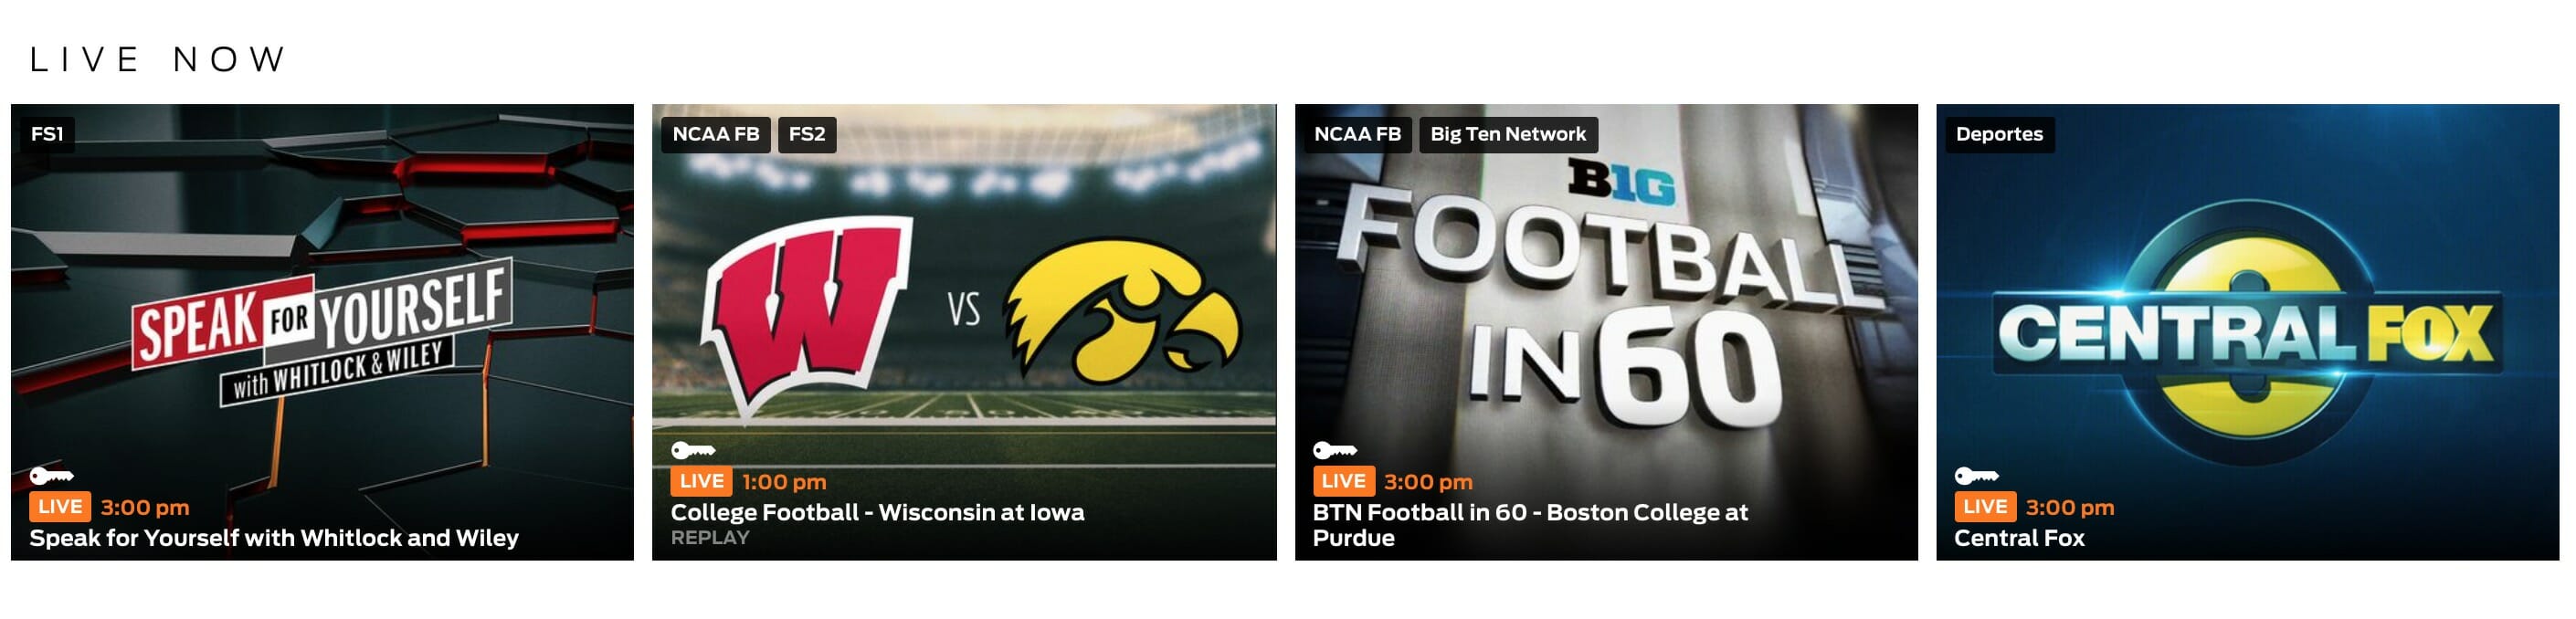 Stream Big Ten Network Live How to Watch Big Ten Conference Sports